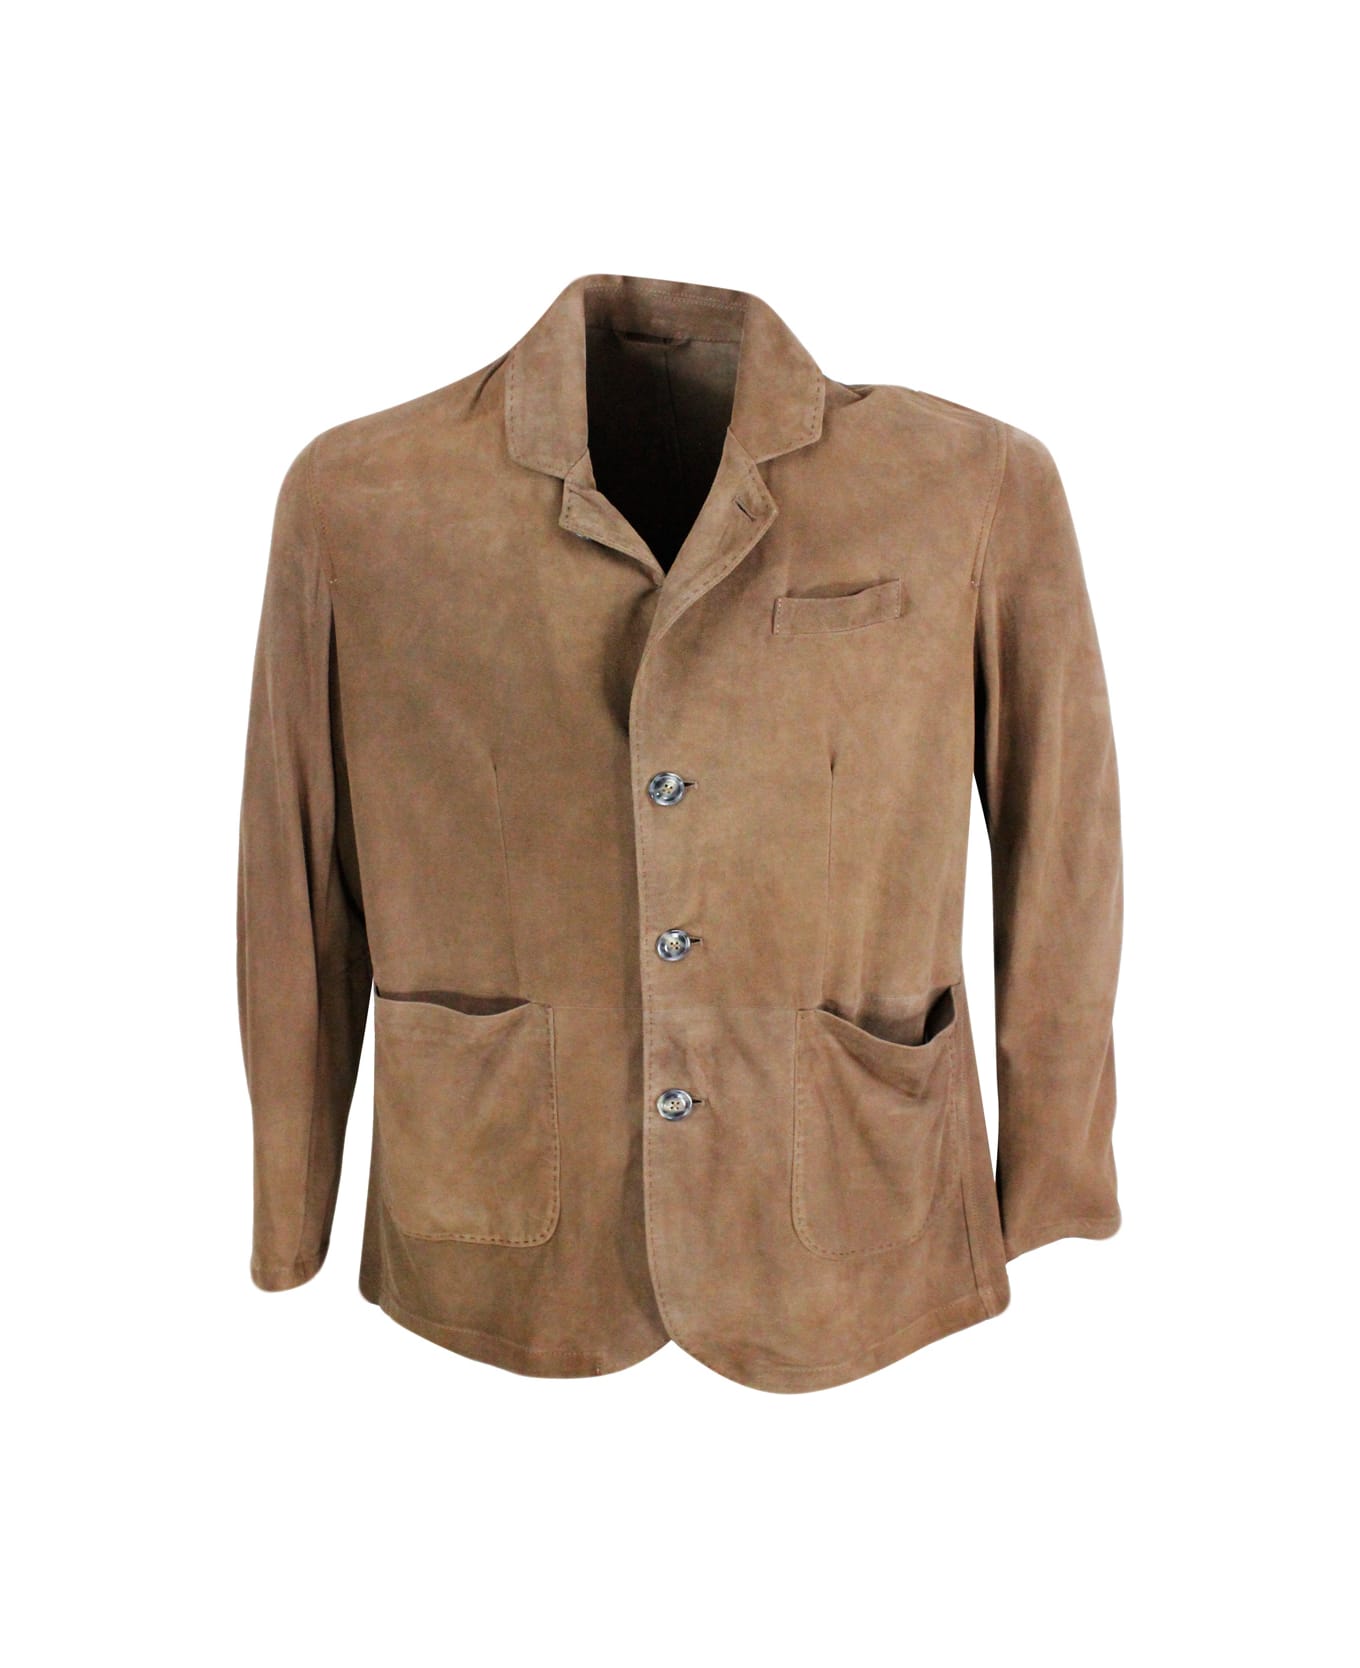 Barba Napoli Jacket In Soft And Fine Single-breasted Suede With 3-button Placket And Patch Pockets - Brown